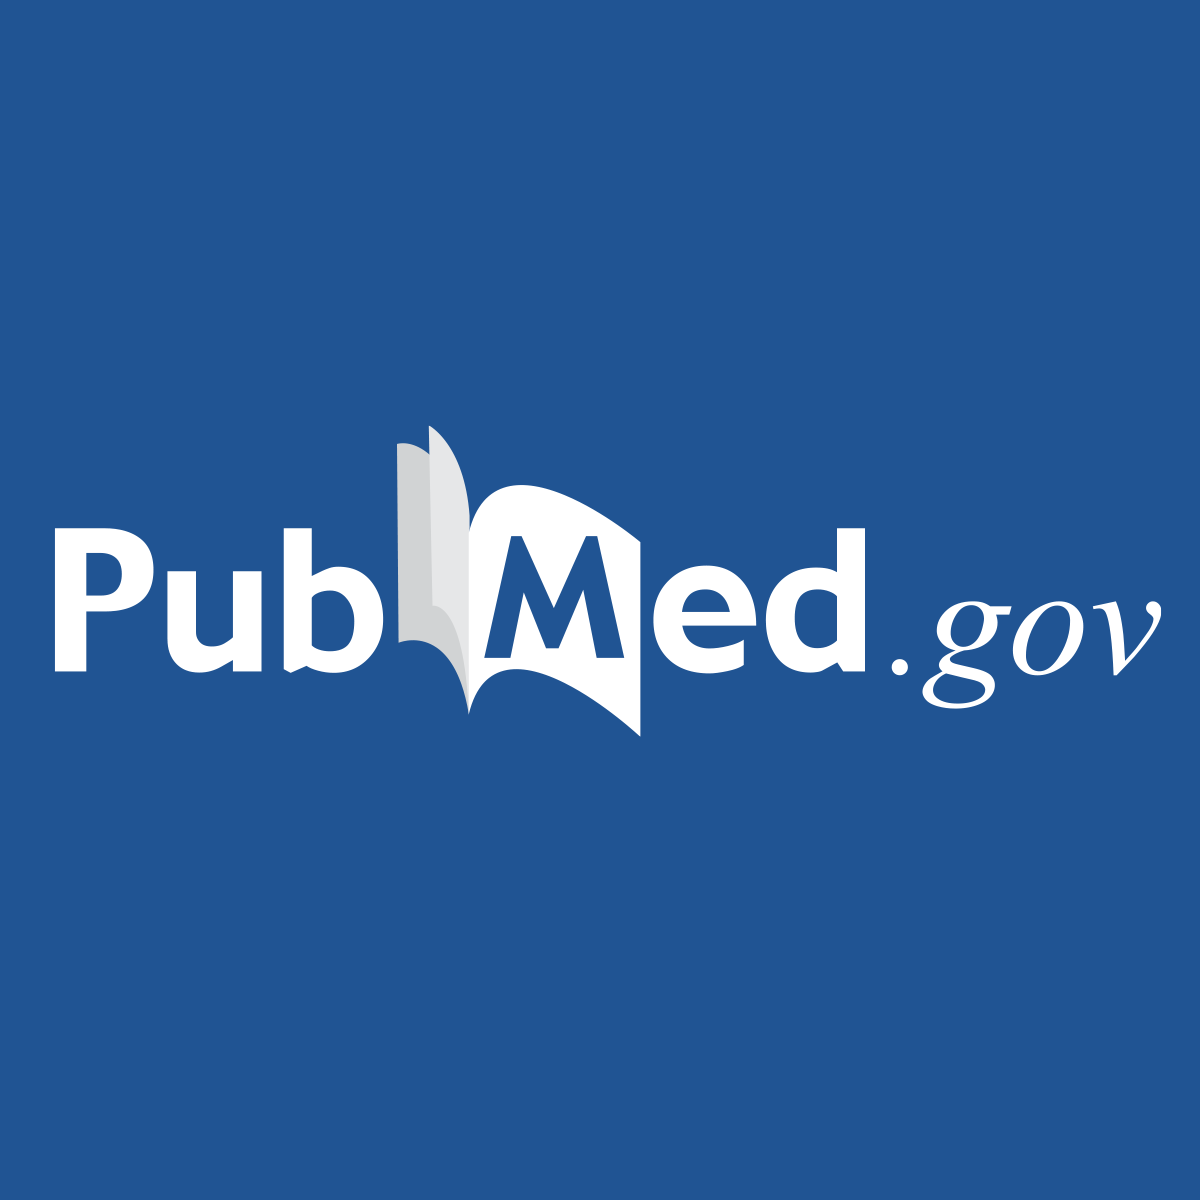 Executive Leadership and Physician Well-being: Nine Organizational Strategies to Promote Engagement and Reduce Burnout - PubMed